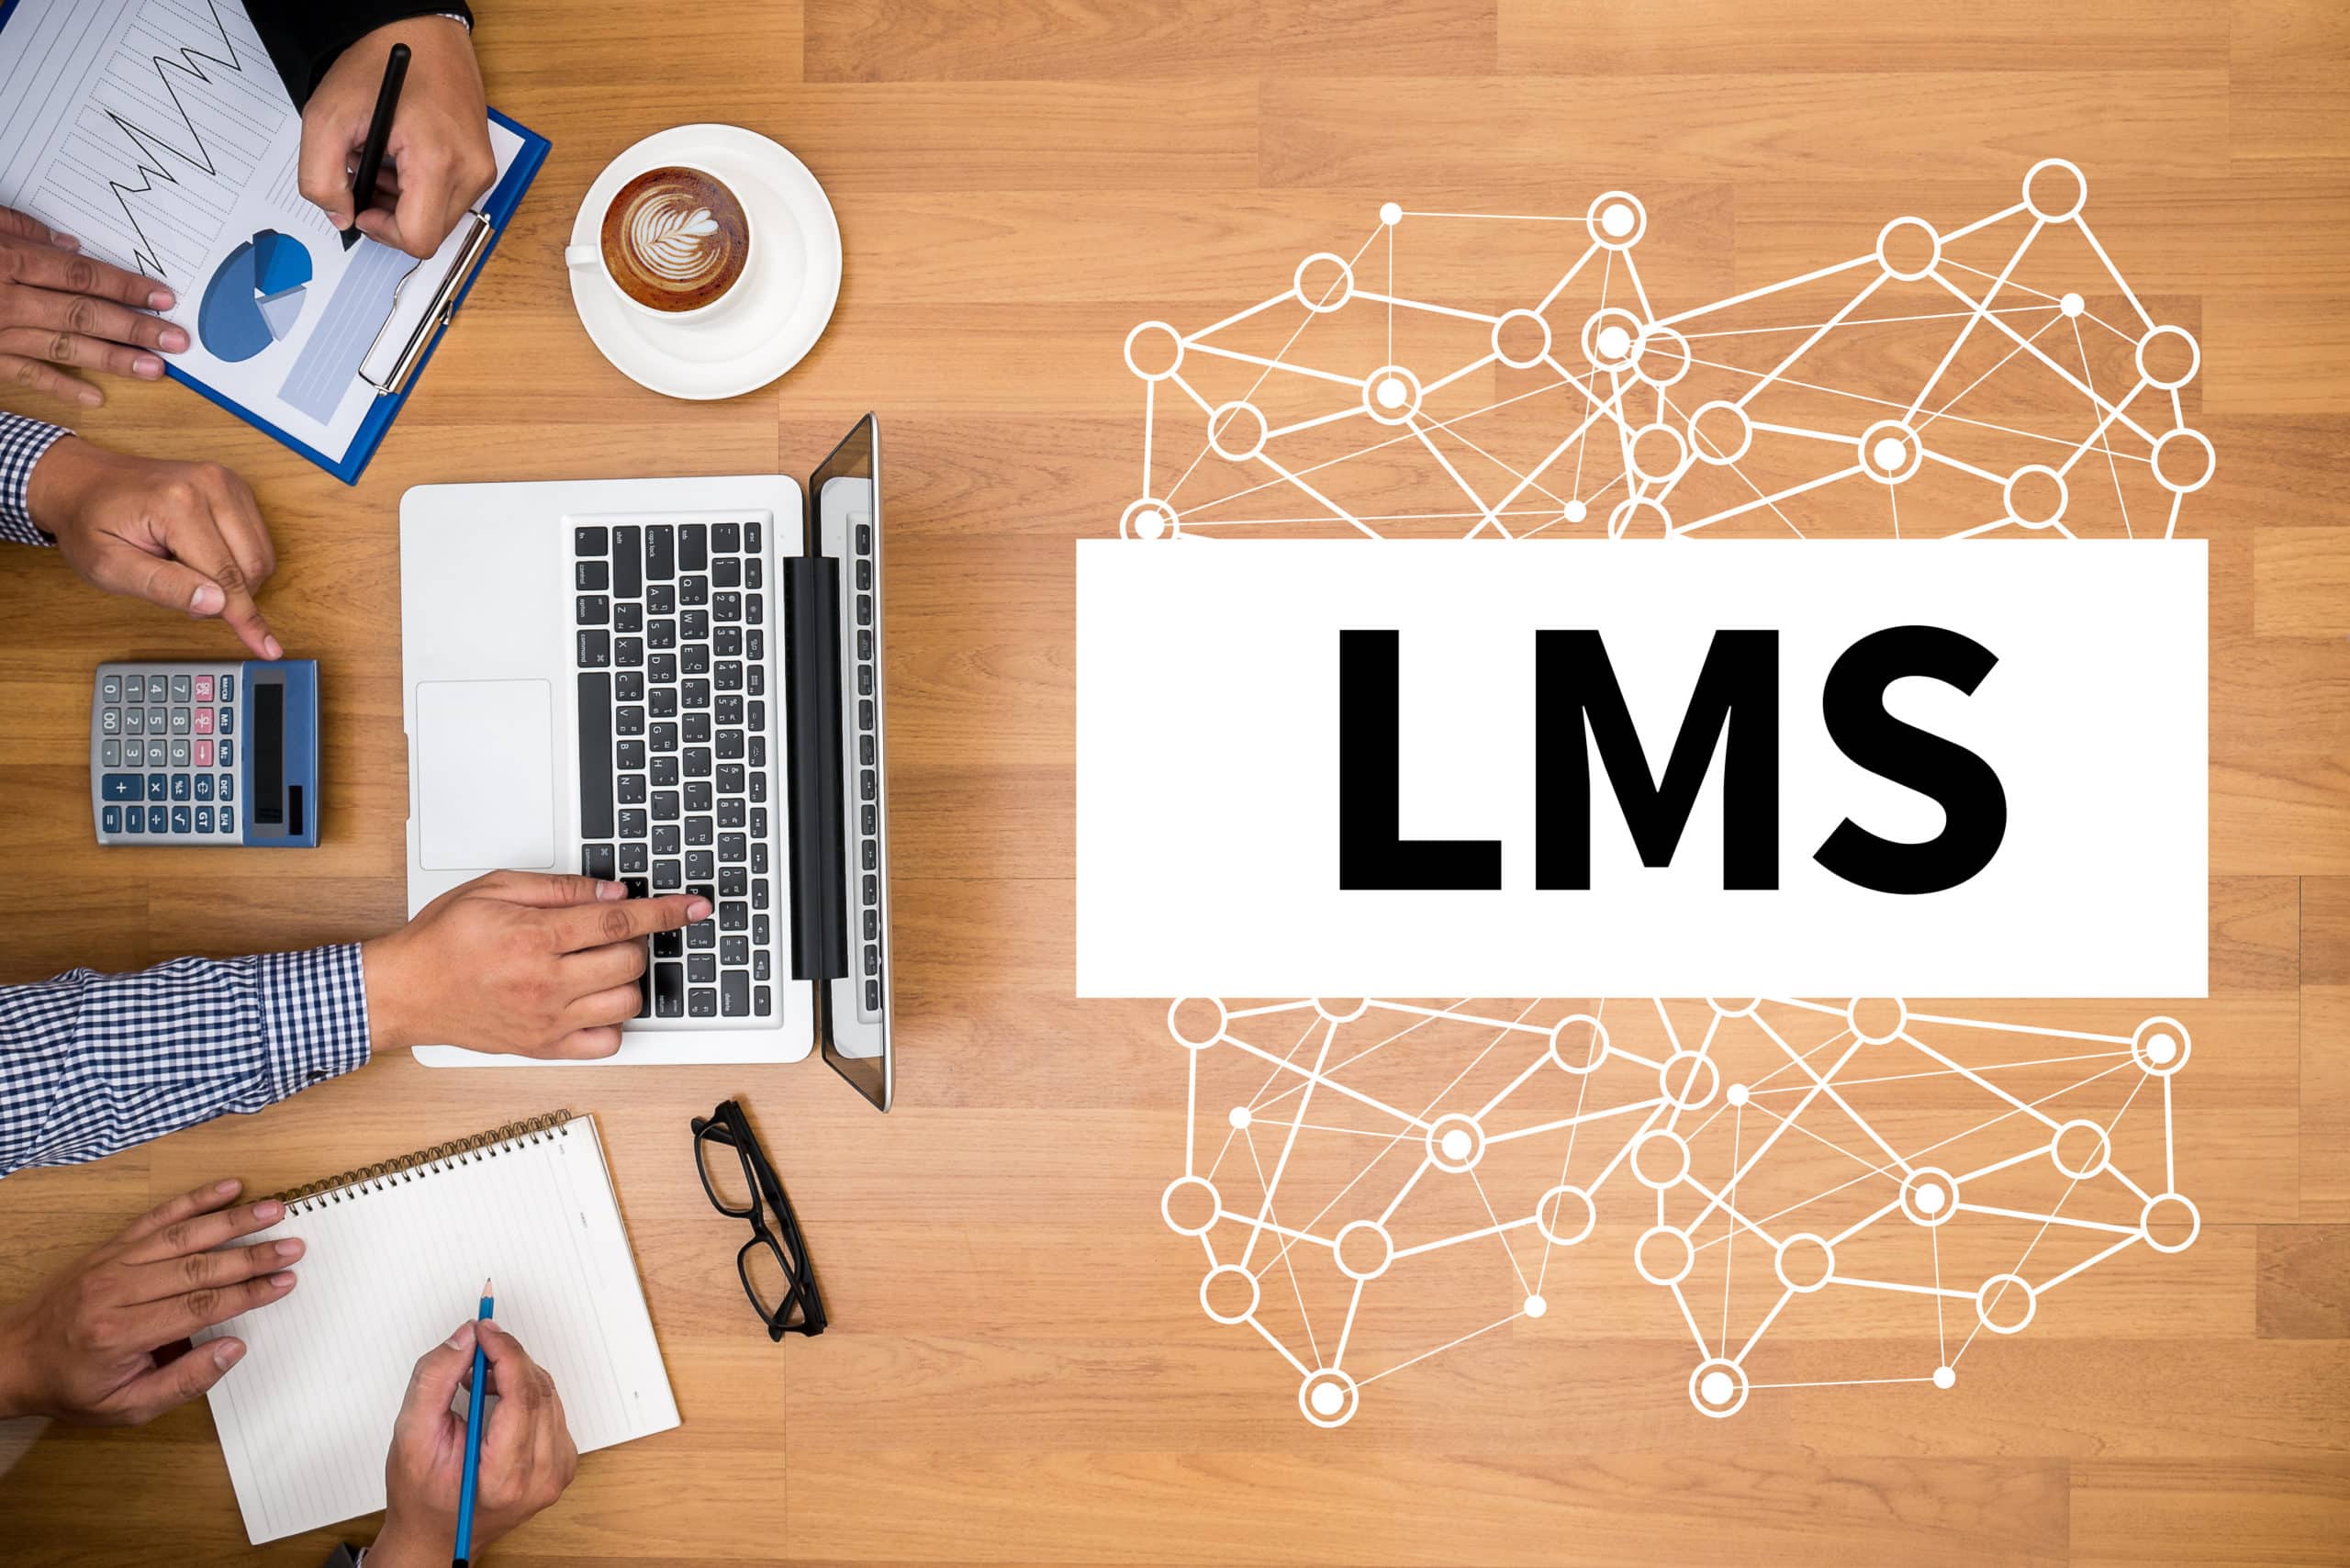 5 Questions to Ask Before Selecting an LMS